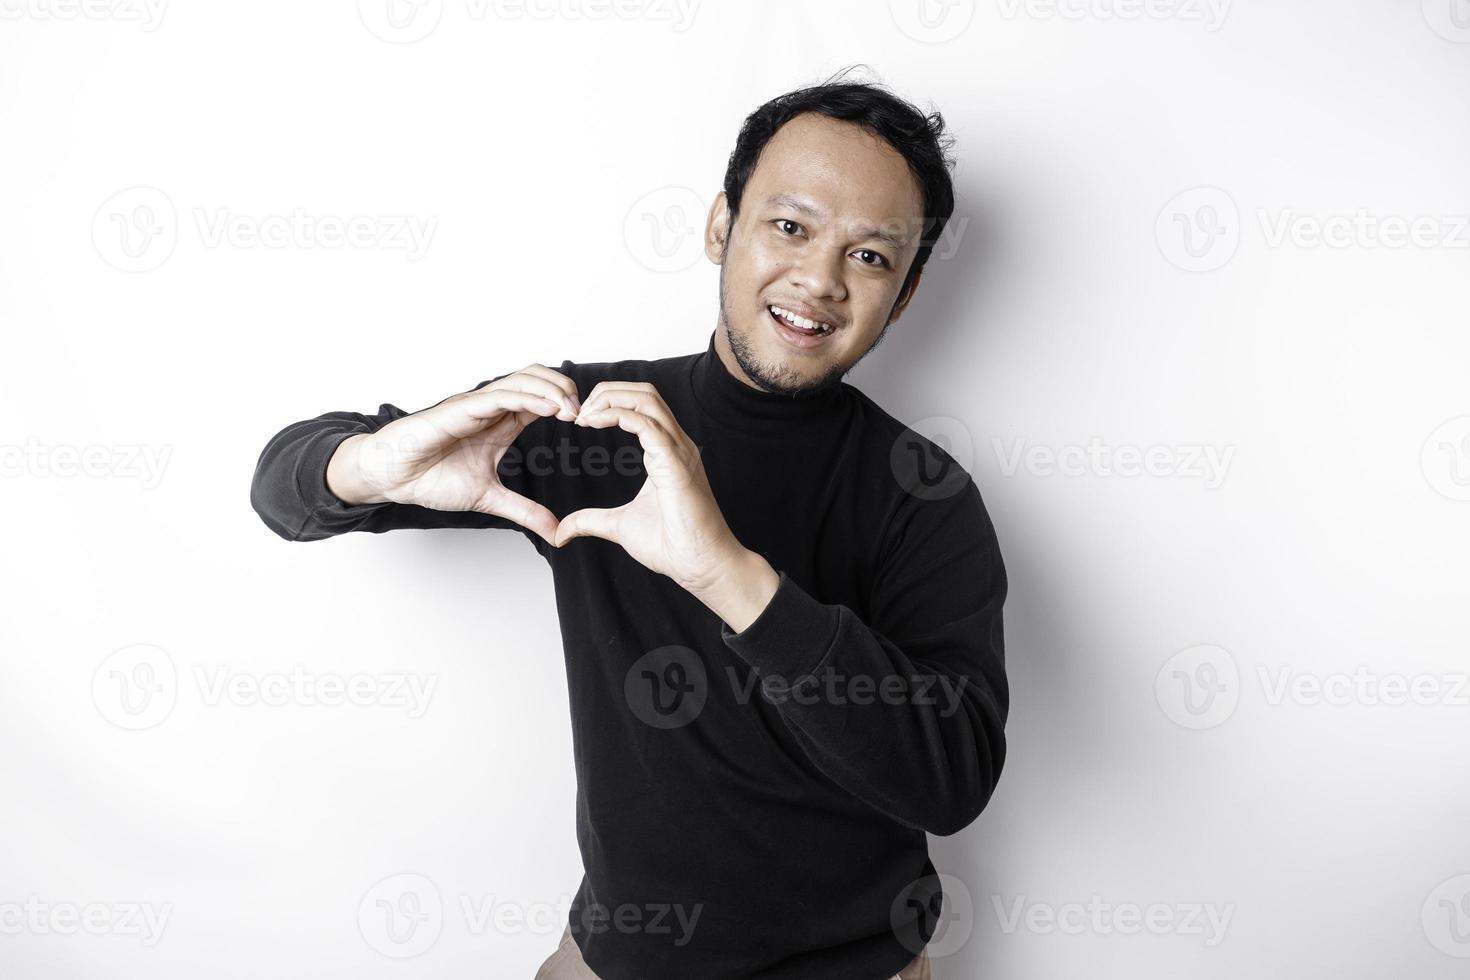 A happy young Asian man wearing a black shirt feels romantic shapes heart gesture expressing tender feelings photo